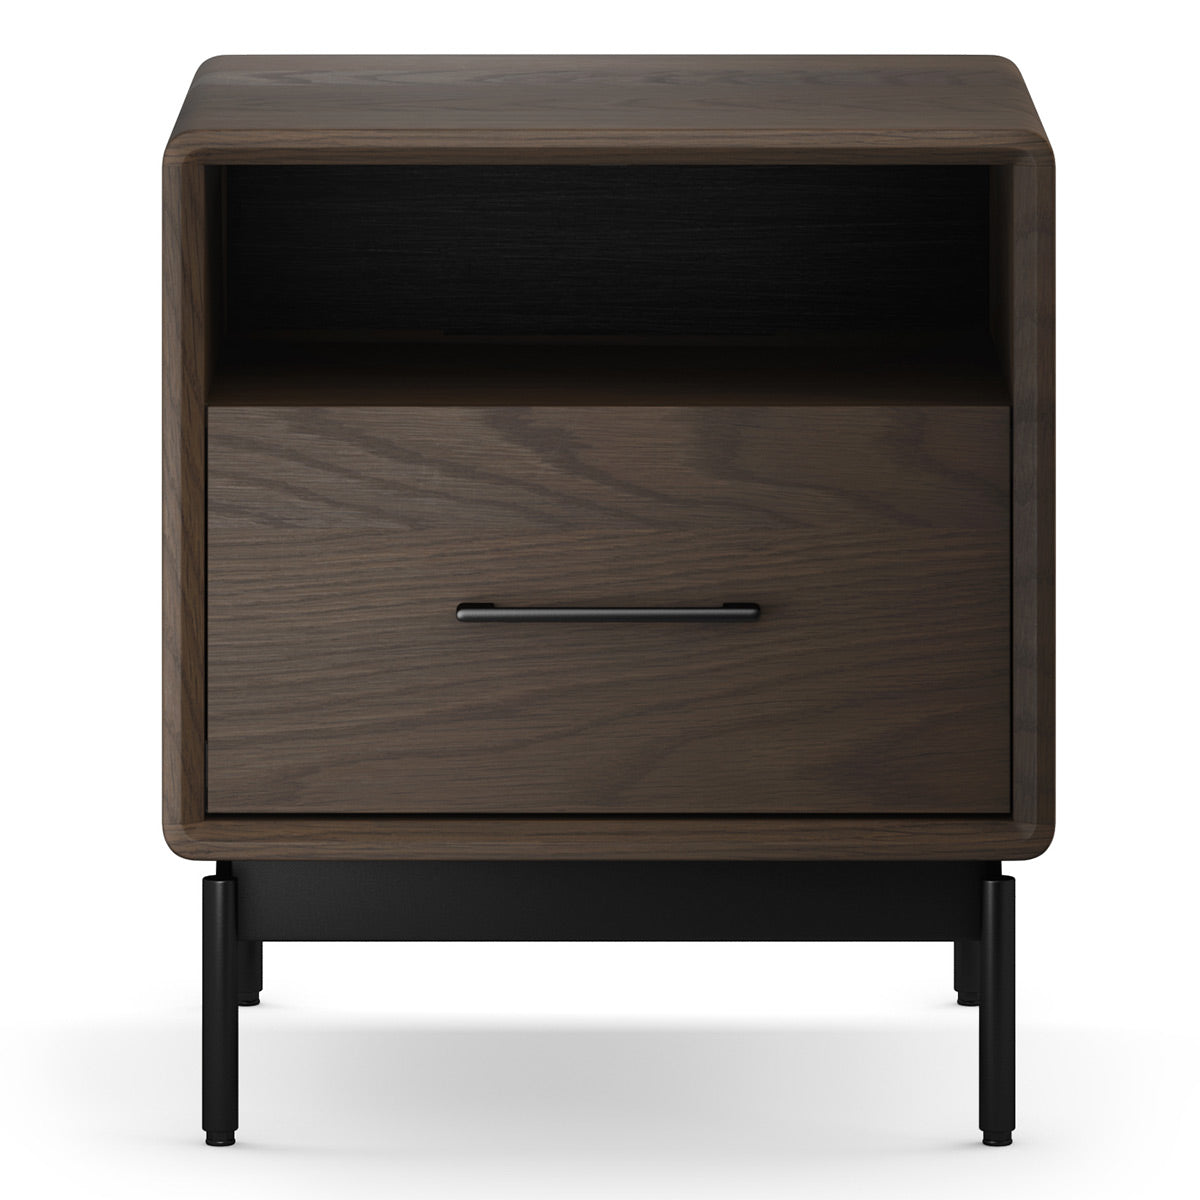 BDI LINQ 9181 22&rdquo; Nightstand with Top Slide and Integrated Power Station (Toasted Oak)